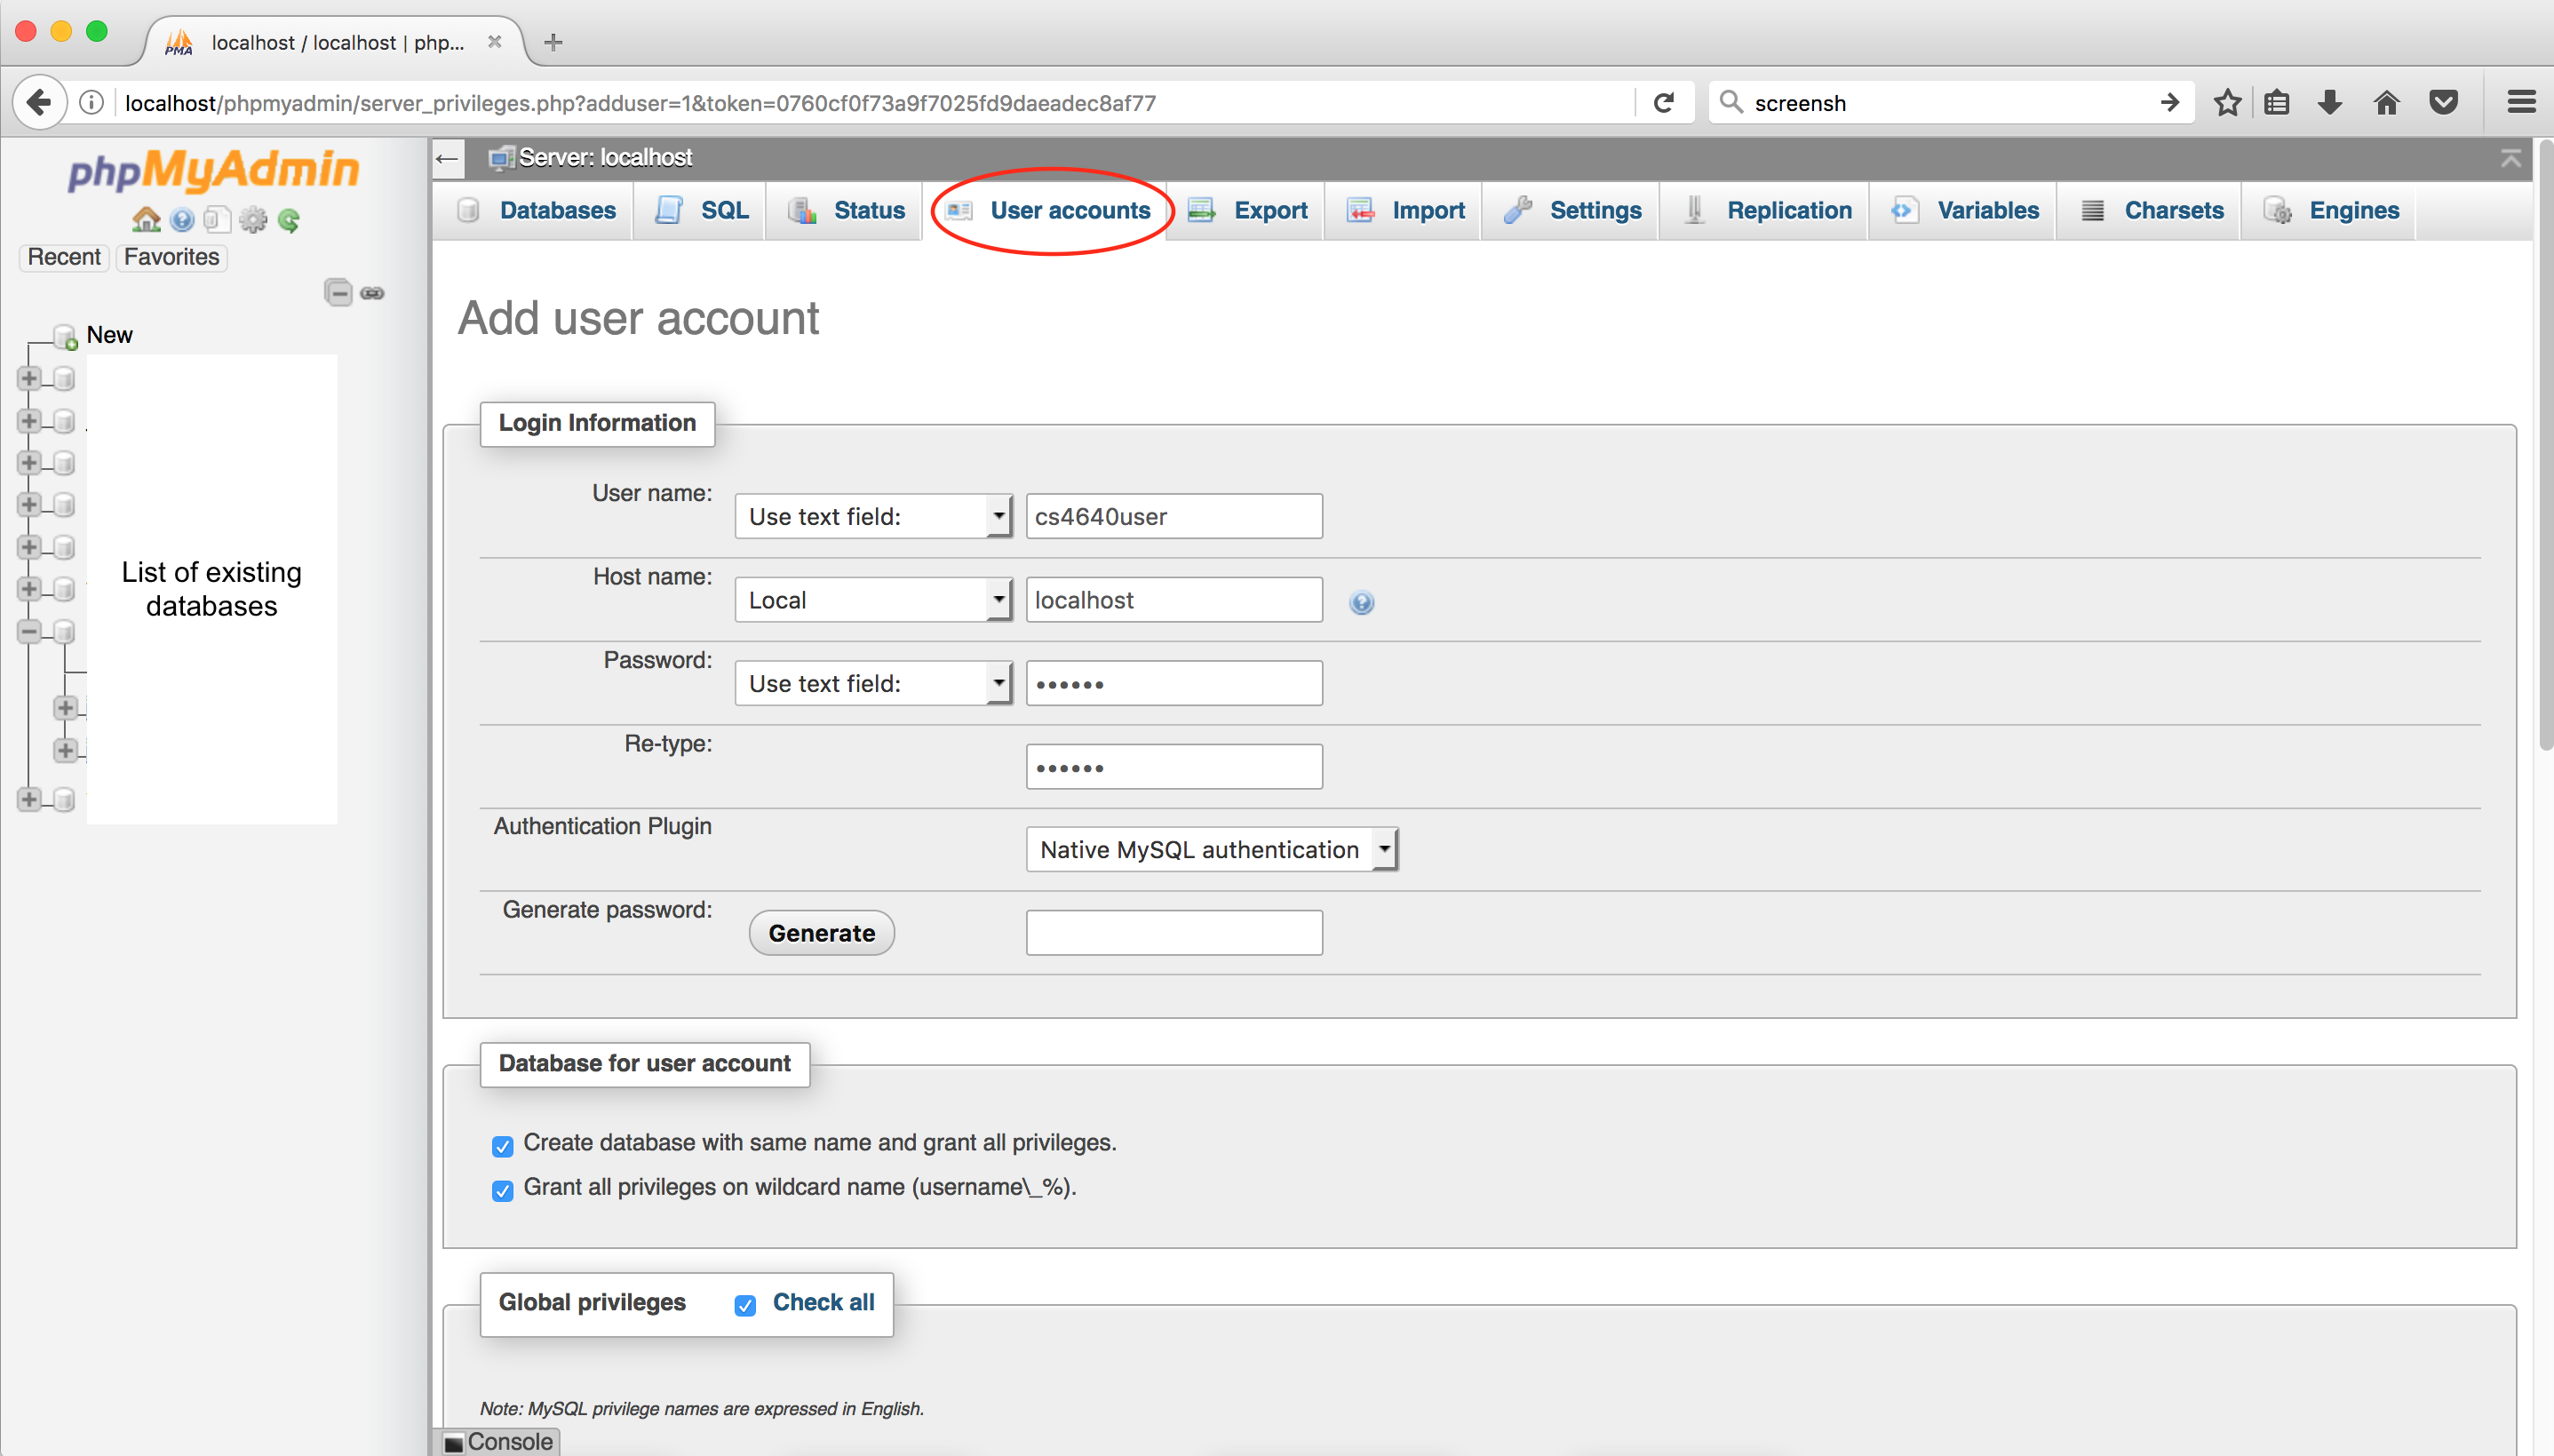 sample screen to add a user account